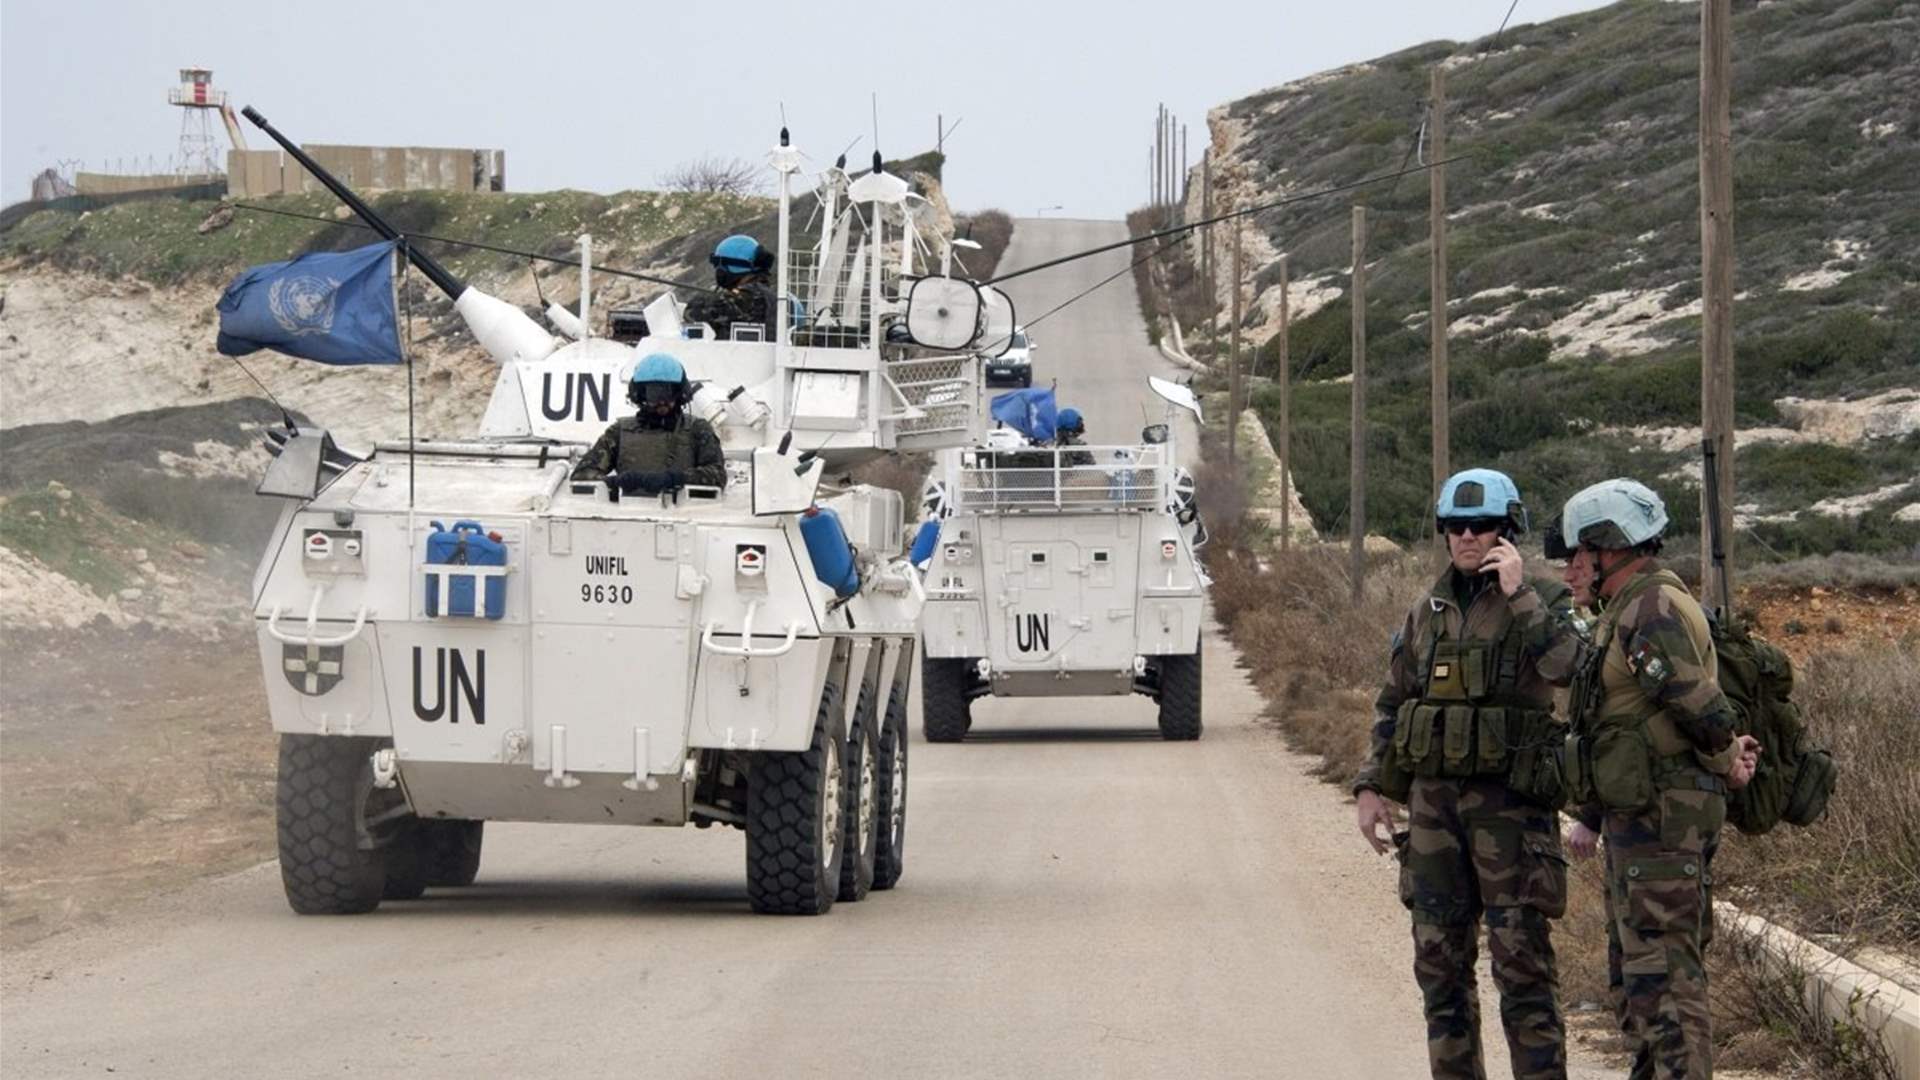 UNIFIL Tenenti: No plans to leave amid efforts to defuse tensions